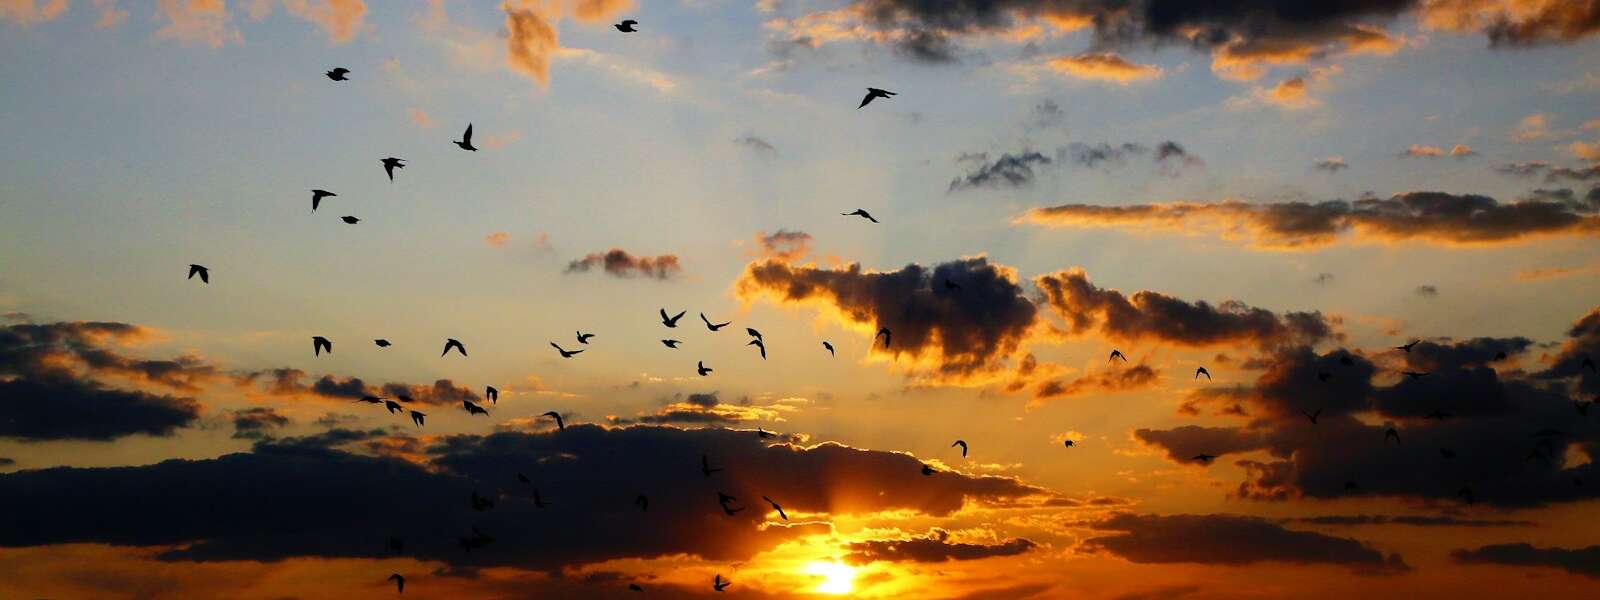 silhouette of birds flying across a cloud-filled sky during sunset